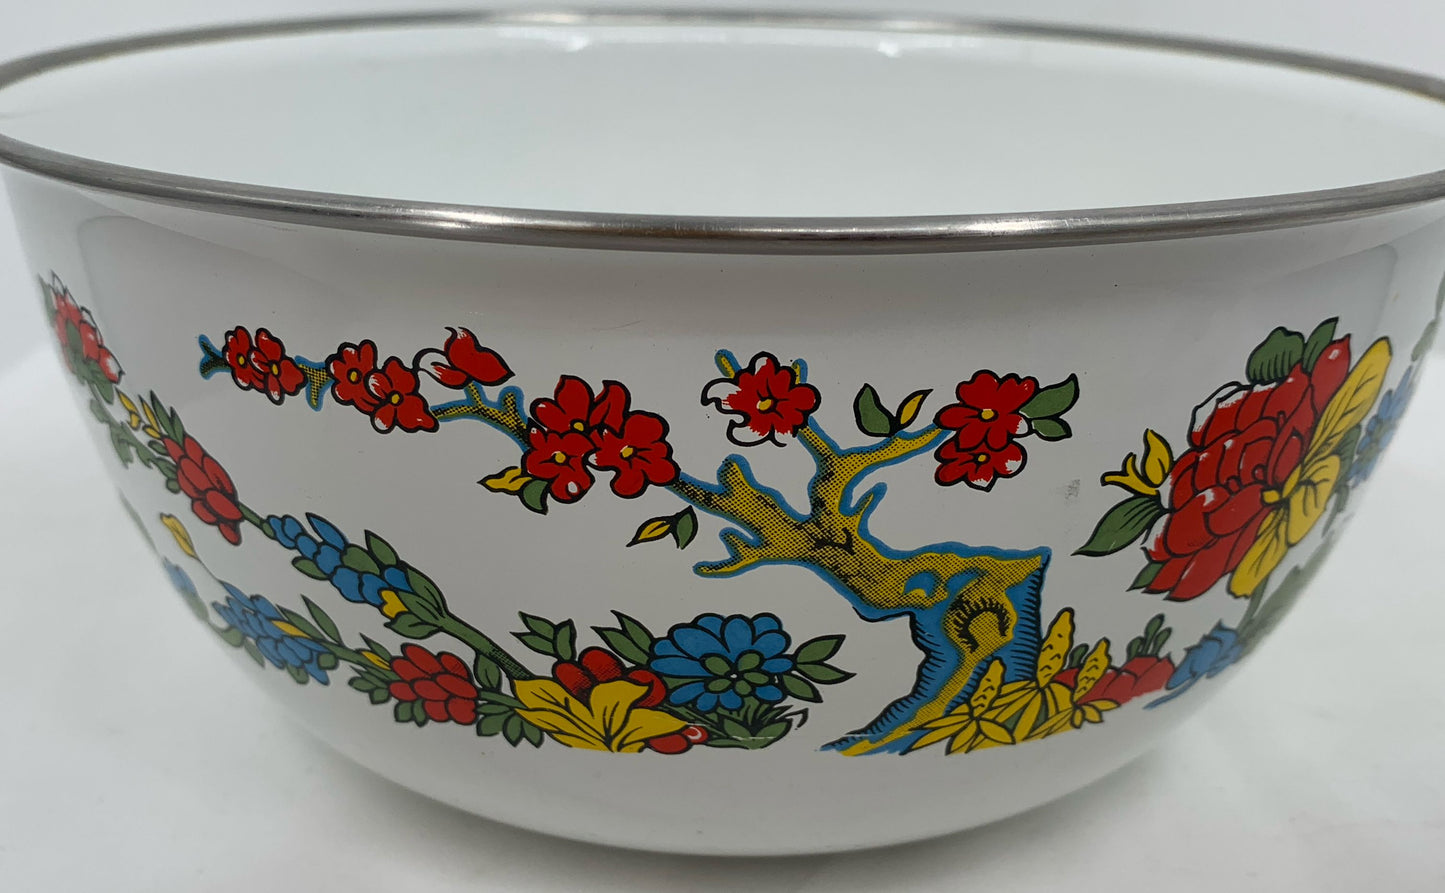 Vintage Enamelware Nesting Mixing Bowls Set Of 3 Red Yellow Blue Flowers 8.75"